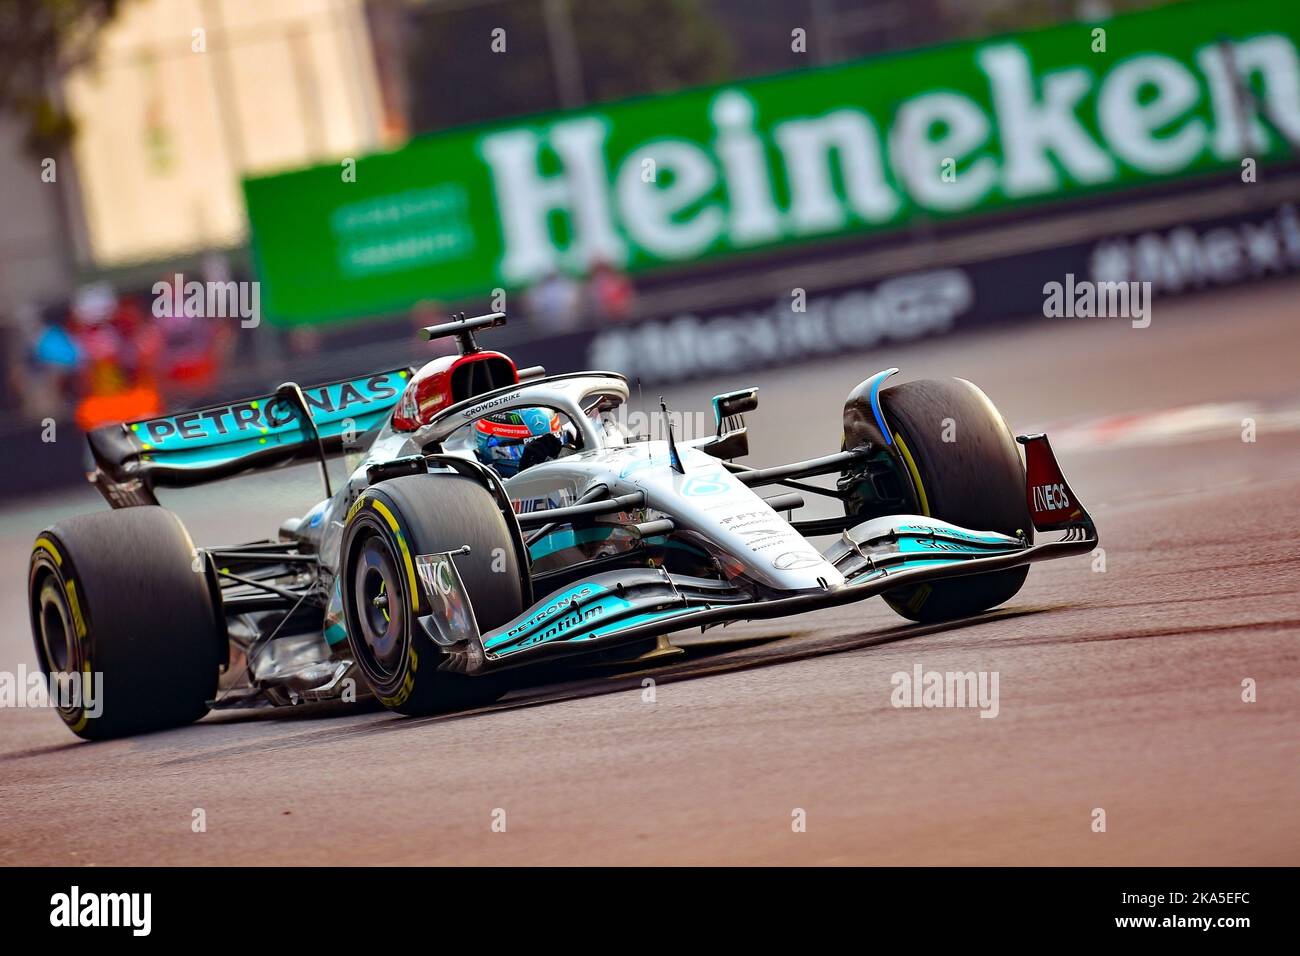 MEXICO City, MEXICO 28. October 2022: George Russell of Great Britain (N-63) Mercedes AMG Petronas F1 Team W13 during practice 2 Day prior to the Formula 1 Grand Prix of Mexico 2022, at Autodromo Hermanos Rodriguez, on October 28, 2022. SPANISH TEXT - followed by English George Russell de Gran Bretana (N-63) Mercedes AMG Petronas F1 Team W13 durante el dia de practicas 2 previo al Gran Premio de Mexico de la Formula 1 2022, en el Autodromo Hermanos Rodriguez, el 28 de Octubre de 2022. F1 Grand Prix held in the Magdalena Mixhuca Park in the Autodromo Hernando Rodriguez, Formula 1 Grand P Stock Photo